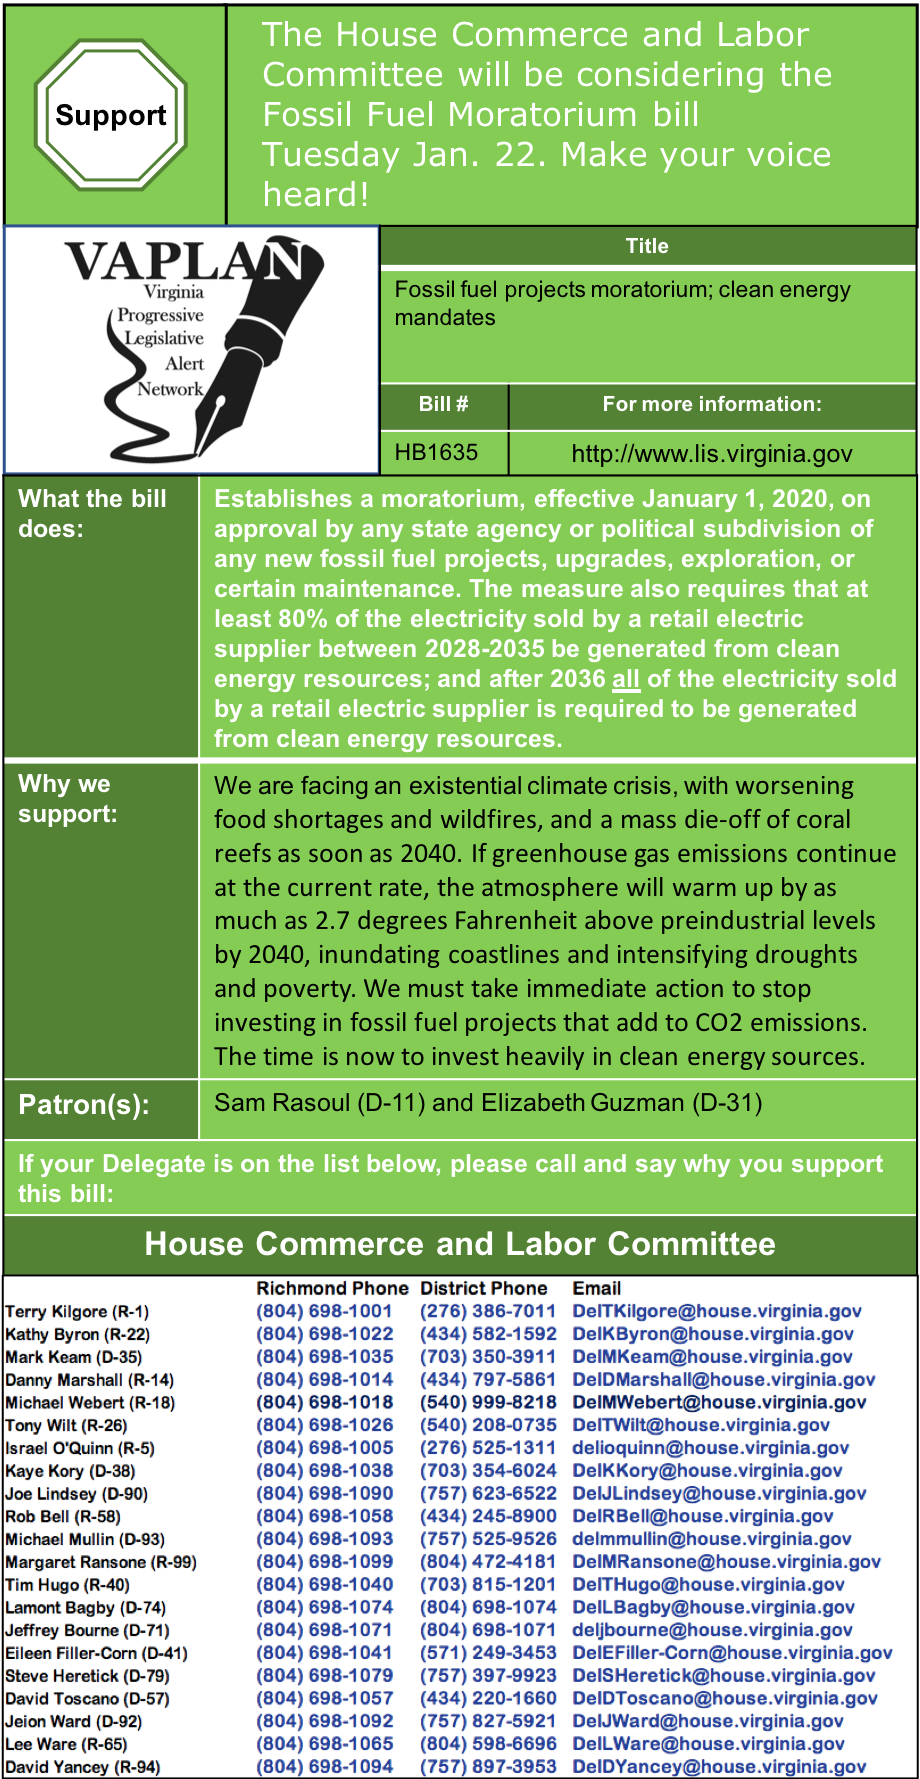 ALERT: Tomorrow afternoon House Commerce and Labor to consider fossil fuel moratorium!